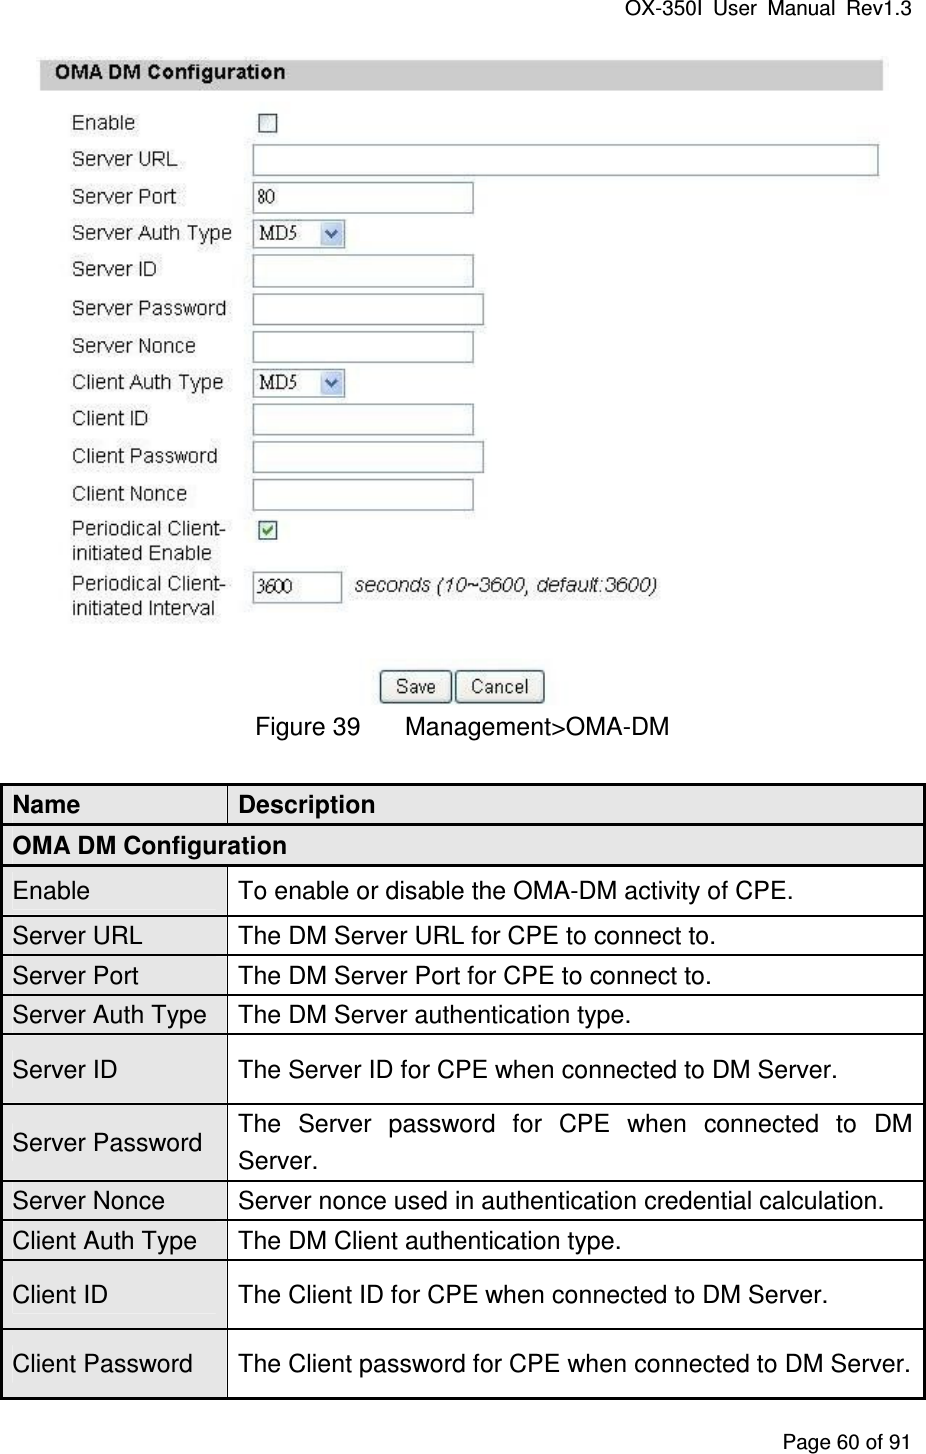 OX-350I  User  Manual  Rev1.3 Page 60 of 91  Figure 39  Management&gt;OMA-DM Name  Description OMA DM Configuration Enable  To enable or disable the OMA-DM activity of CPE. Server URL  The DM Server URL for CPE to connect to. Server Port  The DM Server Port for CPE to connect to. Server Auth Type  The DM Server authentication type. Server ID  The Server ID for CPE when connected to DM Server. Server Password  The  Server  password  for  CPE  when  connected  to  DM Server. Server Nonce  Server nonce used in authentication credential calculation. Client Auth Type  The DM Client authentication type. Client ID  The Client ID for CPE when connected to DM Server. Client Password  The Client password for CPE when connected to DM Server. 